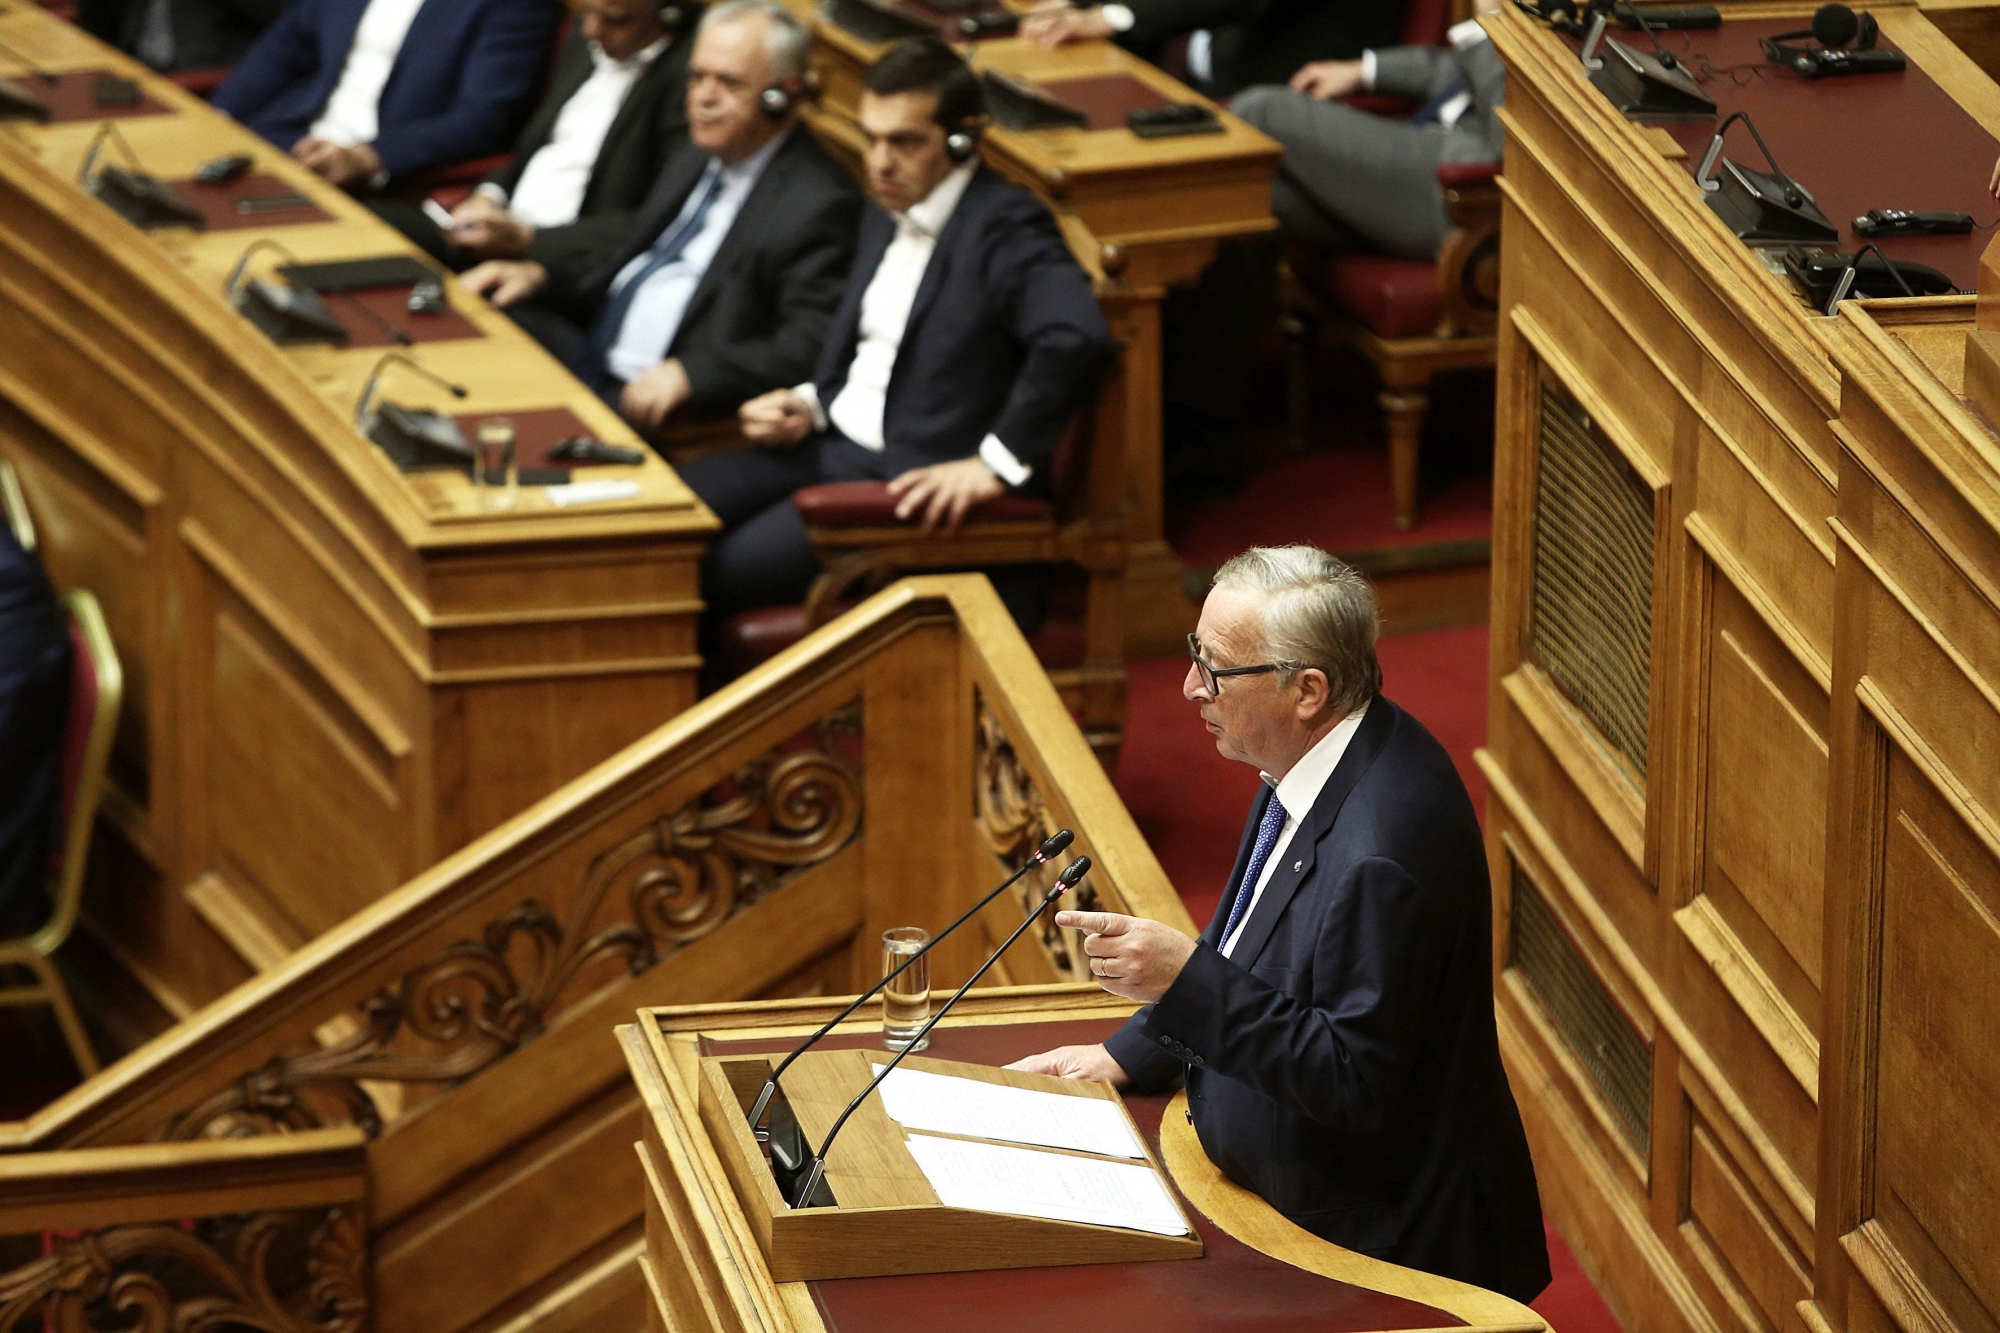 epa06693901 European Commission President, Jean-Claude Juncker speaks to lawmakers during a plenary session at the Greek Parliament in Athens, Greece, 26 April 2018. Juncker is on an official visit to Athens.  EPA/SIMELA PANTZARTZI GREECE EU JUNCKER